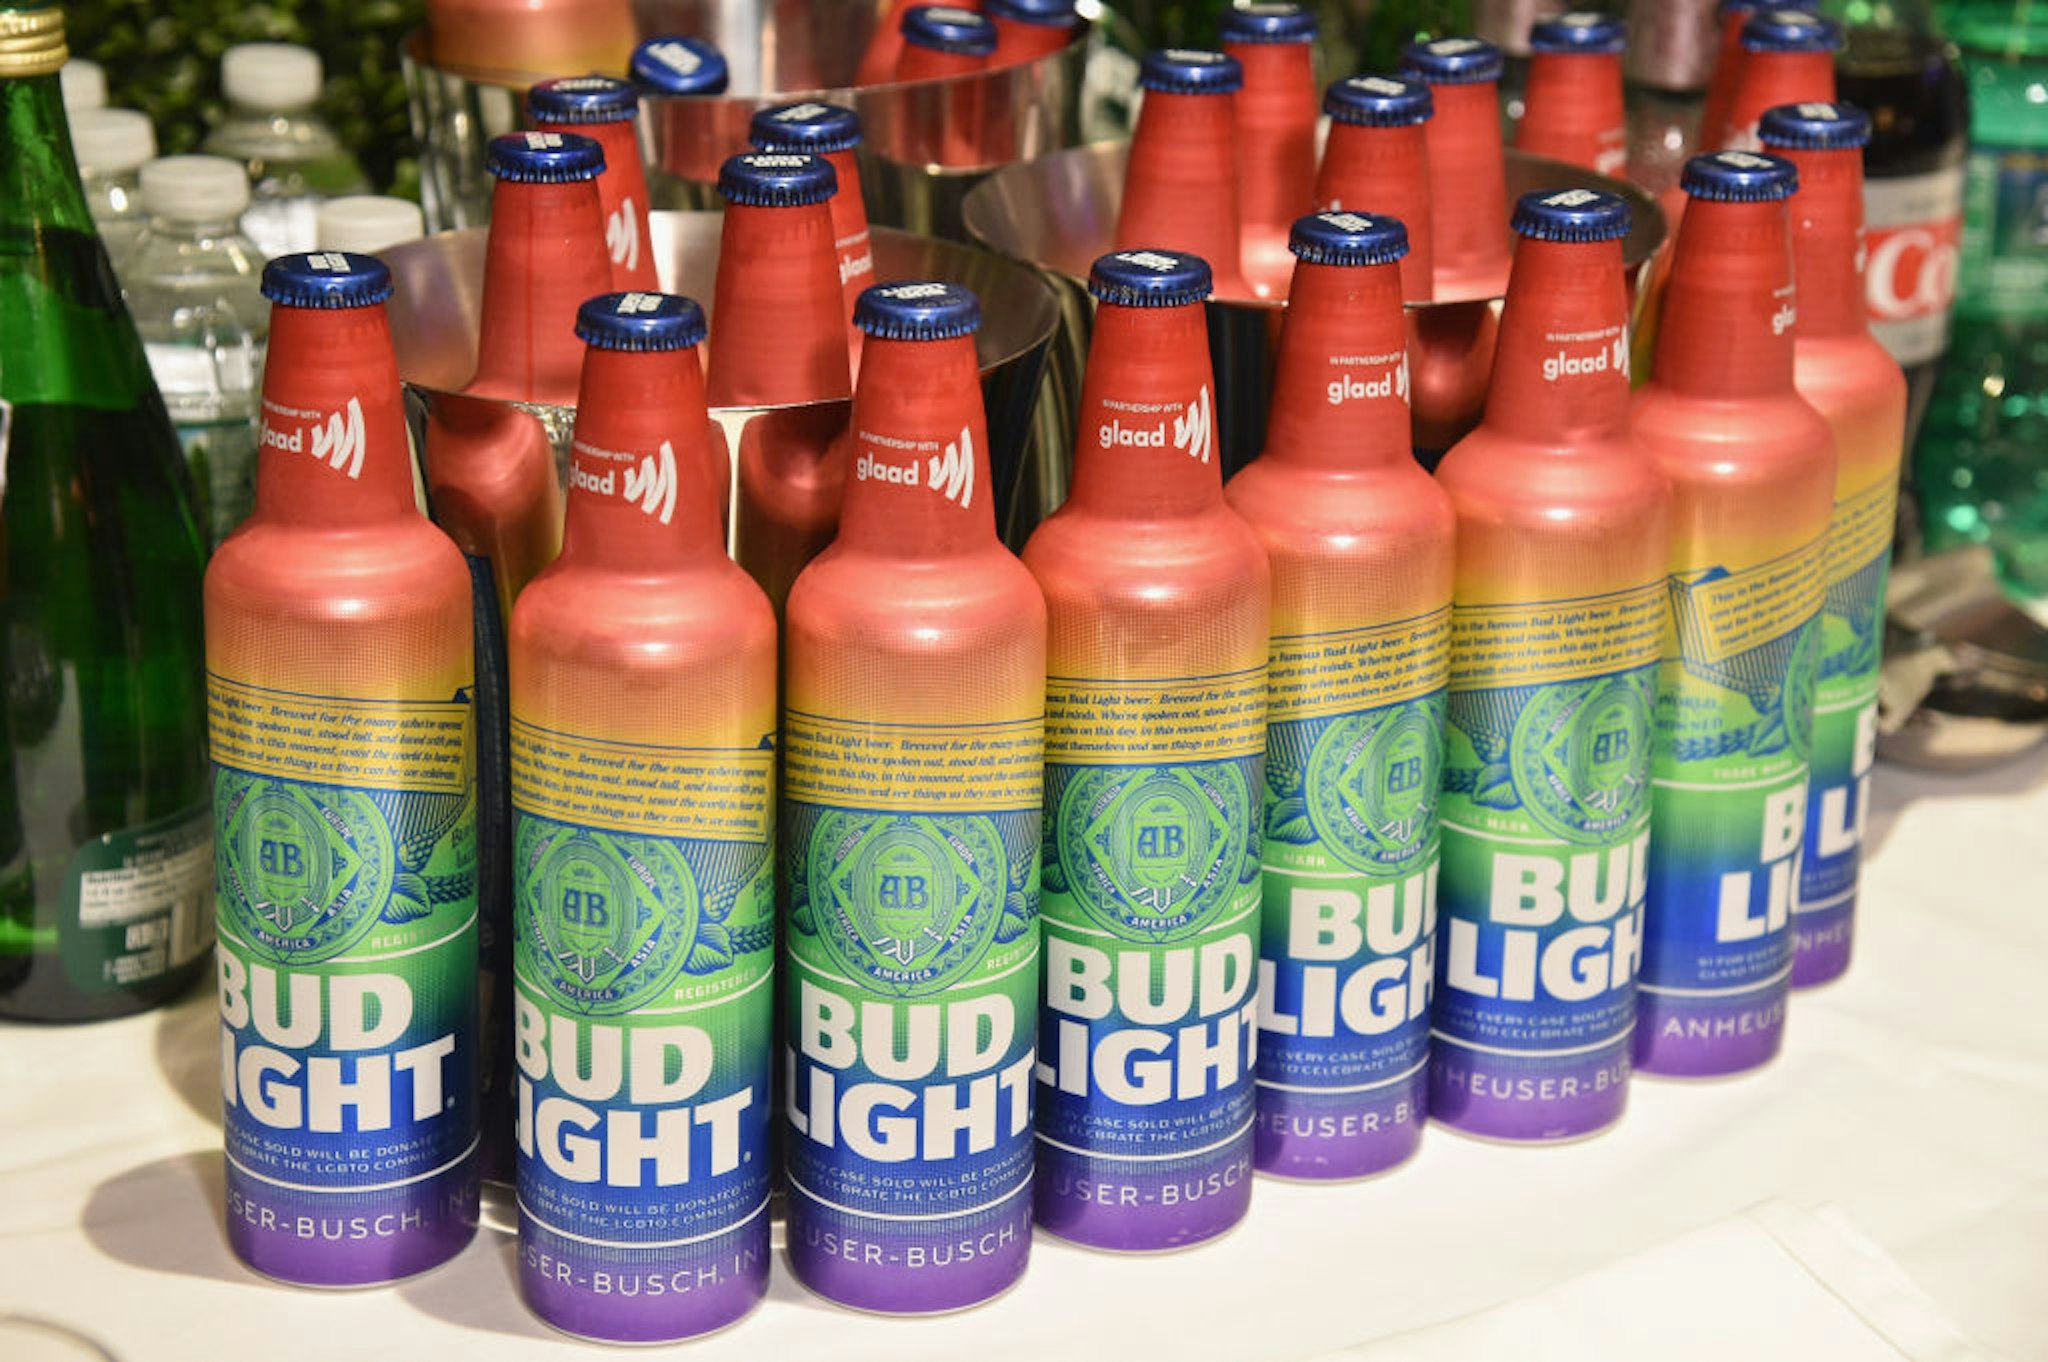 NEW YORK, NEW YORK - MAY 04: A view of rainbow bottles of Bud Light during the 30th Annual GLAAD Media Awards New York at New York Hilton Midtown on May 04, 2019 in New York City.